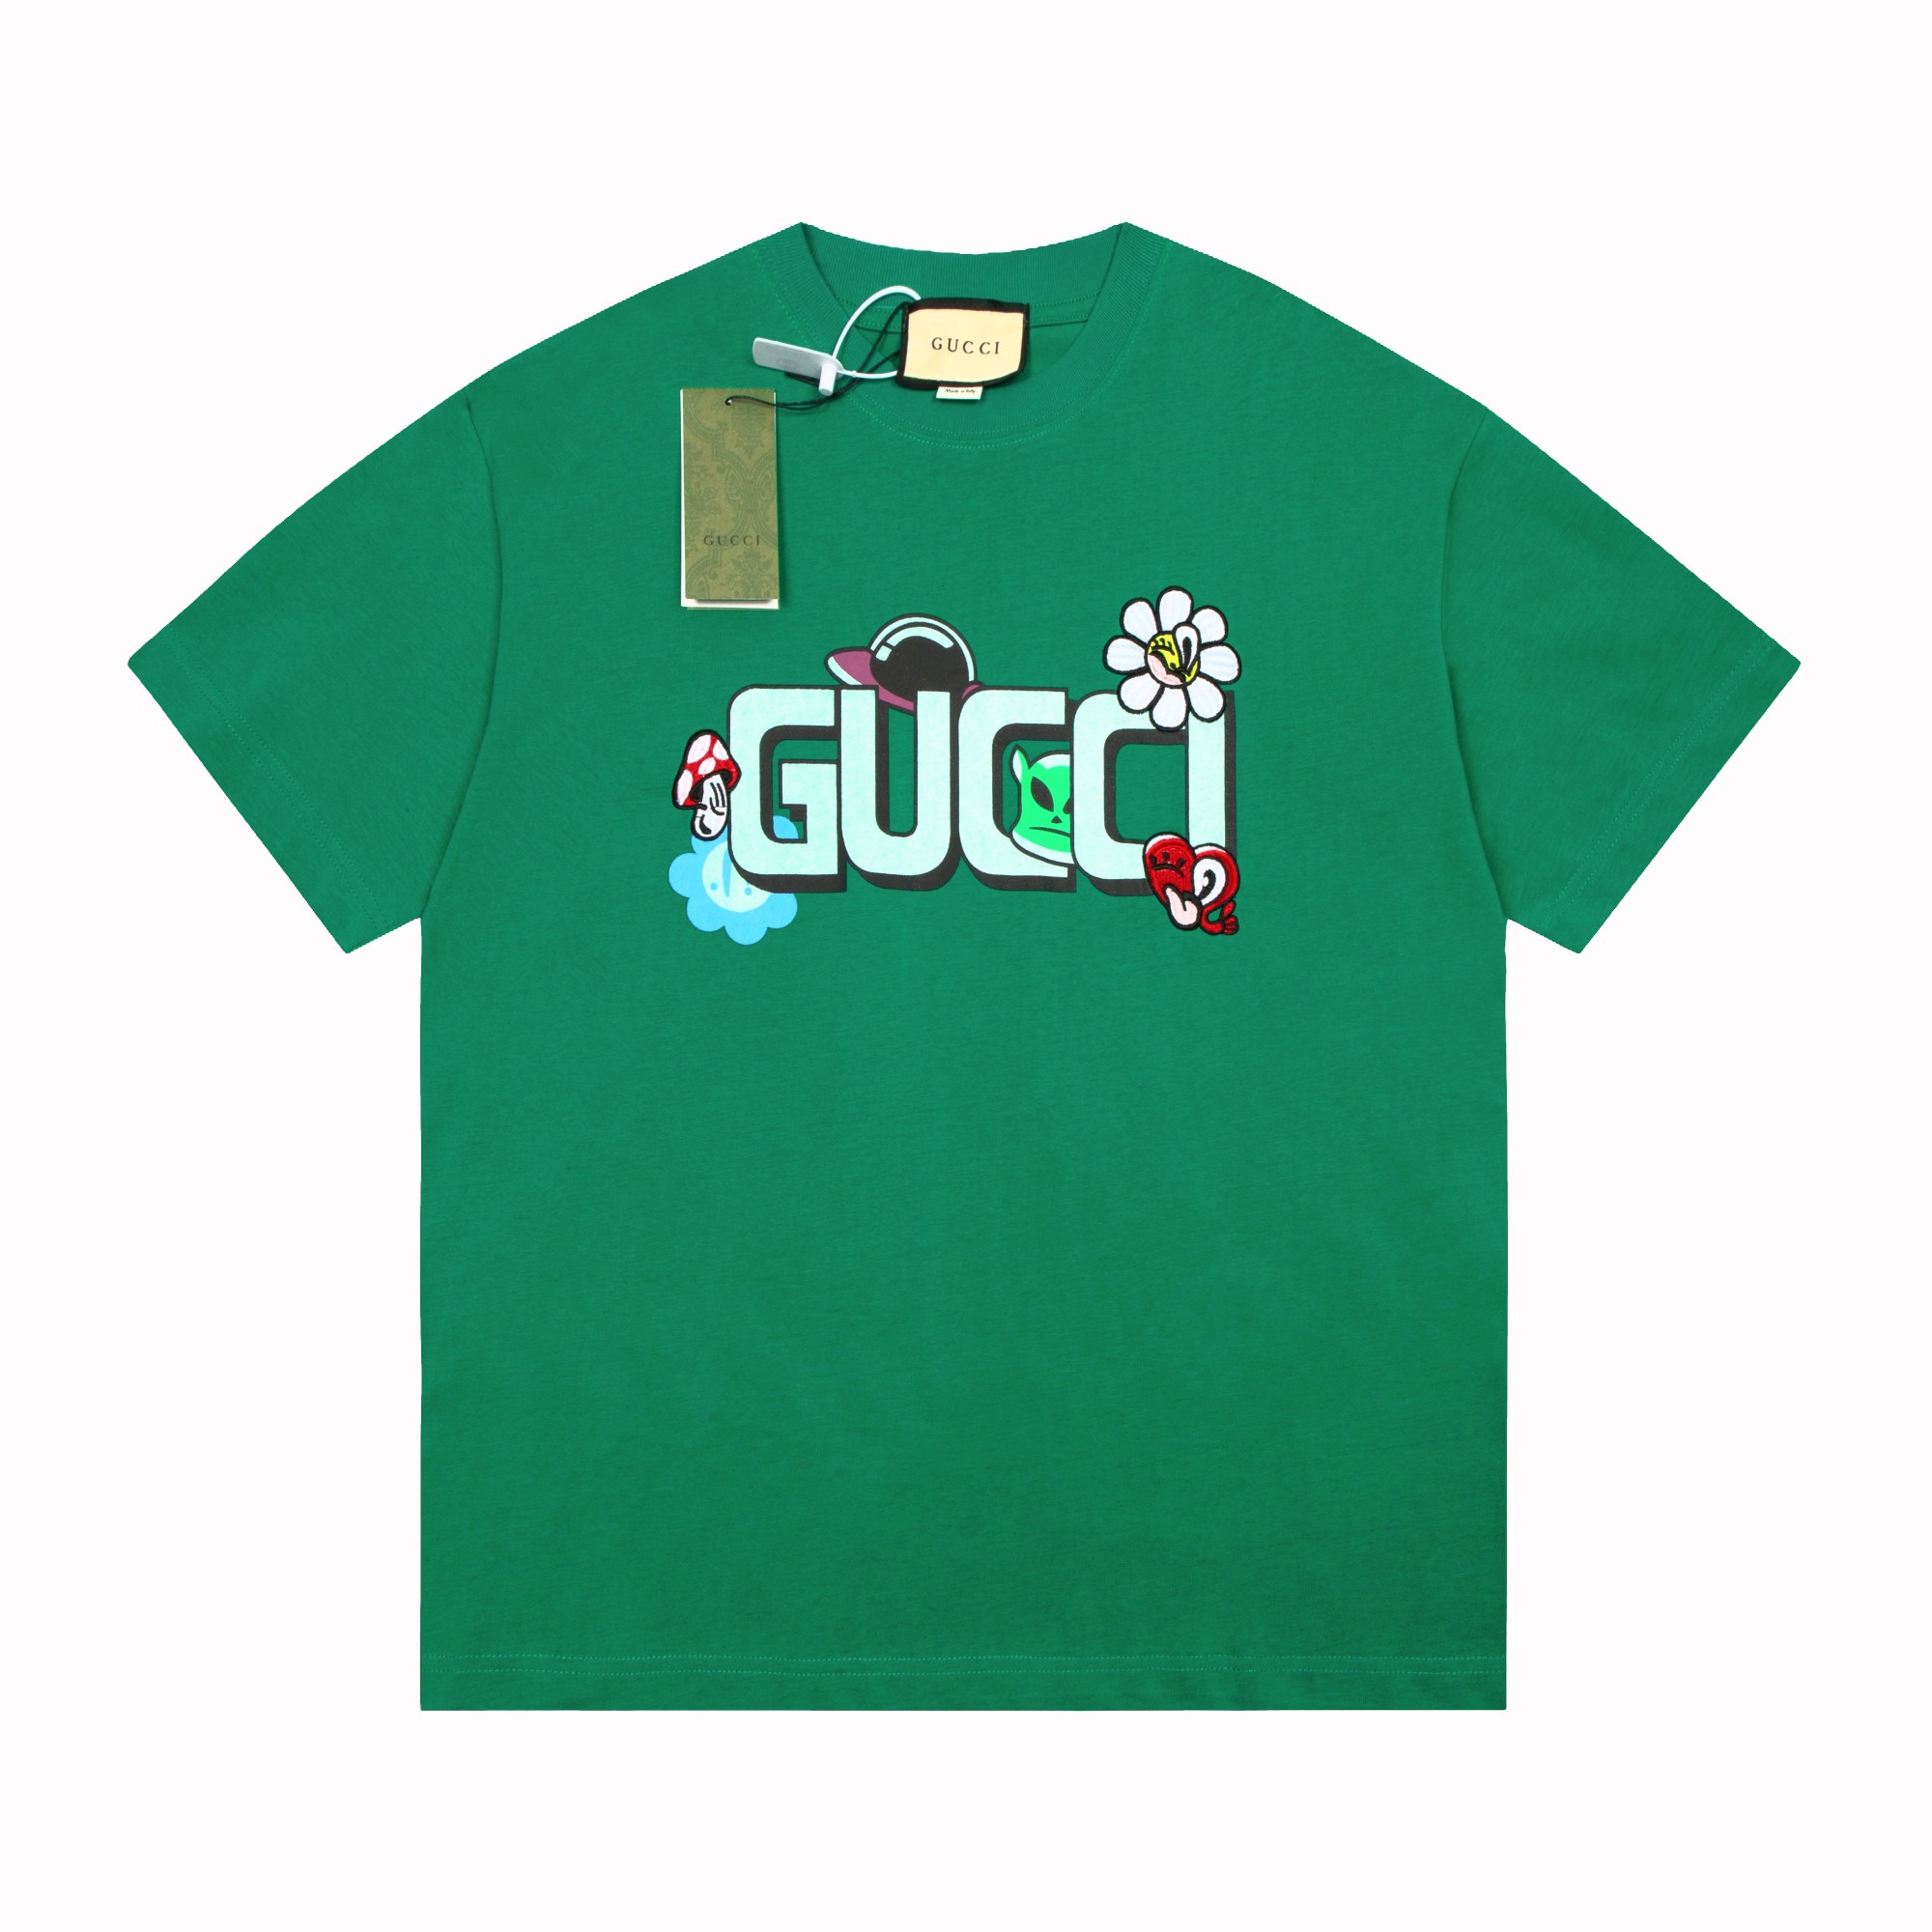 Gucci Clothing T-Shirt Embroidery Unisex Cotton Spring/Summer Collection Short Sleeve